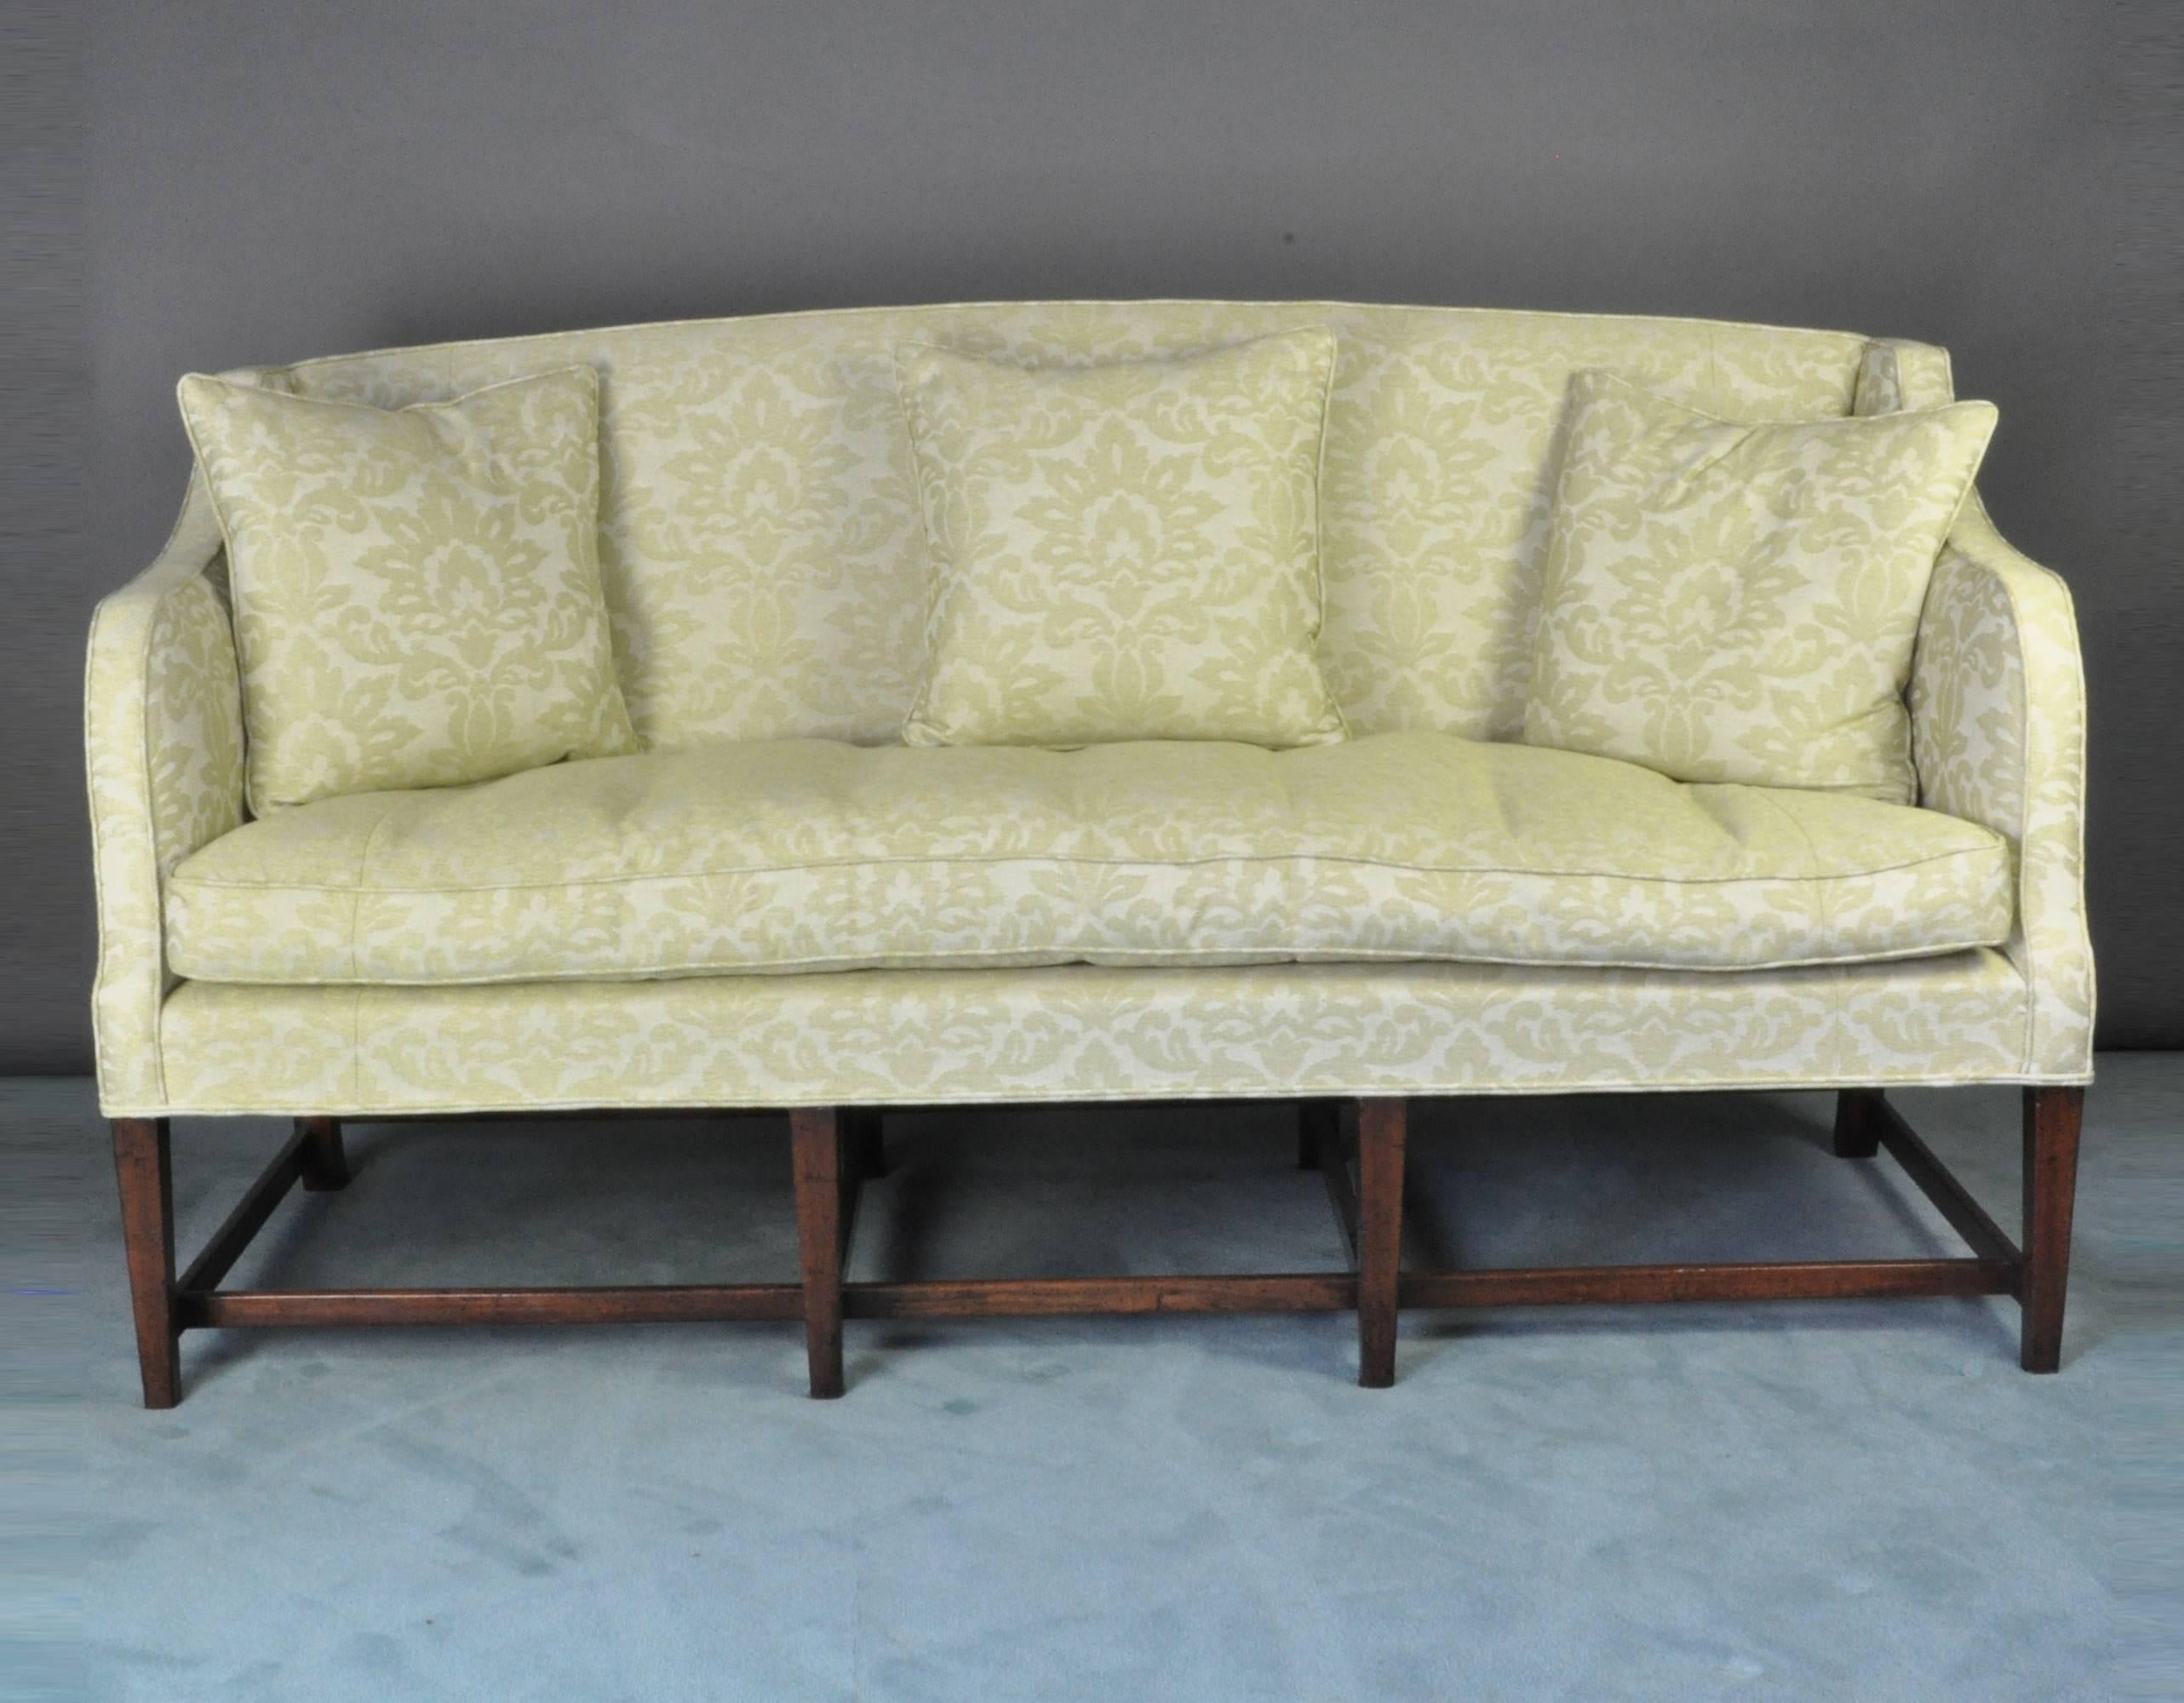 A good early 19th century mahogany framed settee or sofa standing on eight square tapering legs, joined by plain stretchers. The shaped back and arms above a bow-fronted seat re-upholstered in soft green damask.
 